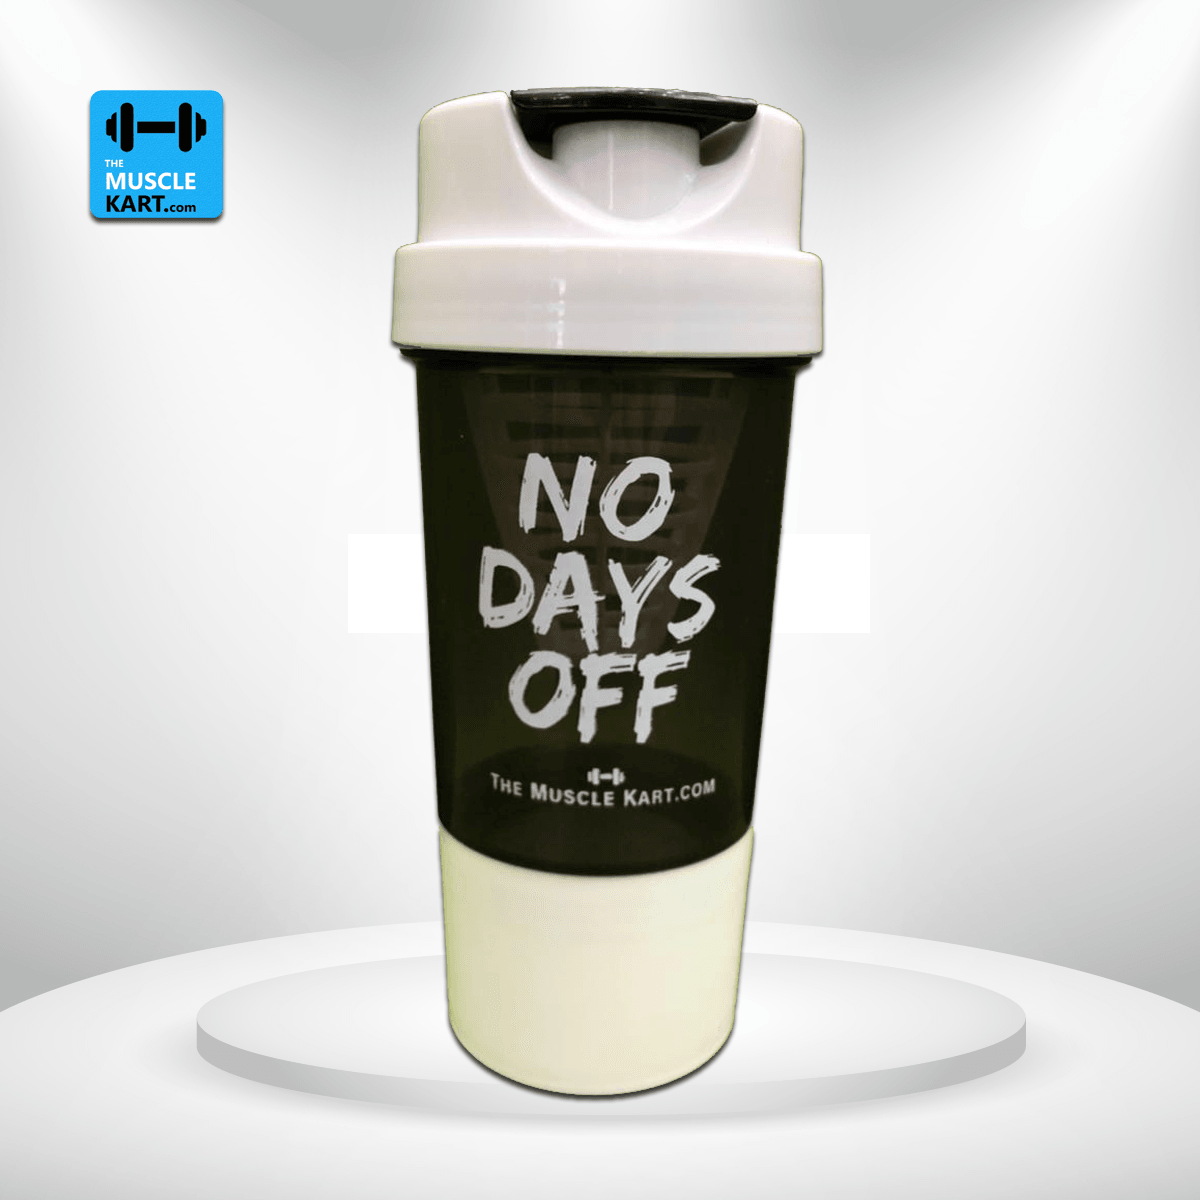 No Days Off Cyclone Protein Compartment Gym Shaker - The Muscle Kart.com